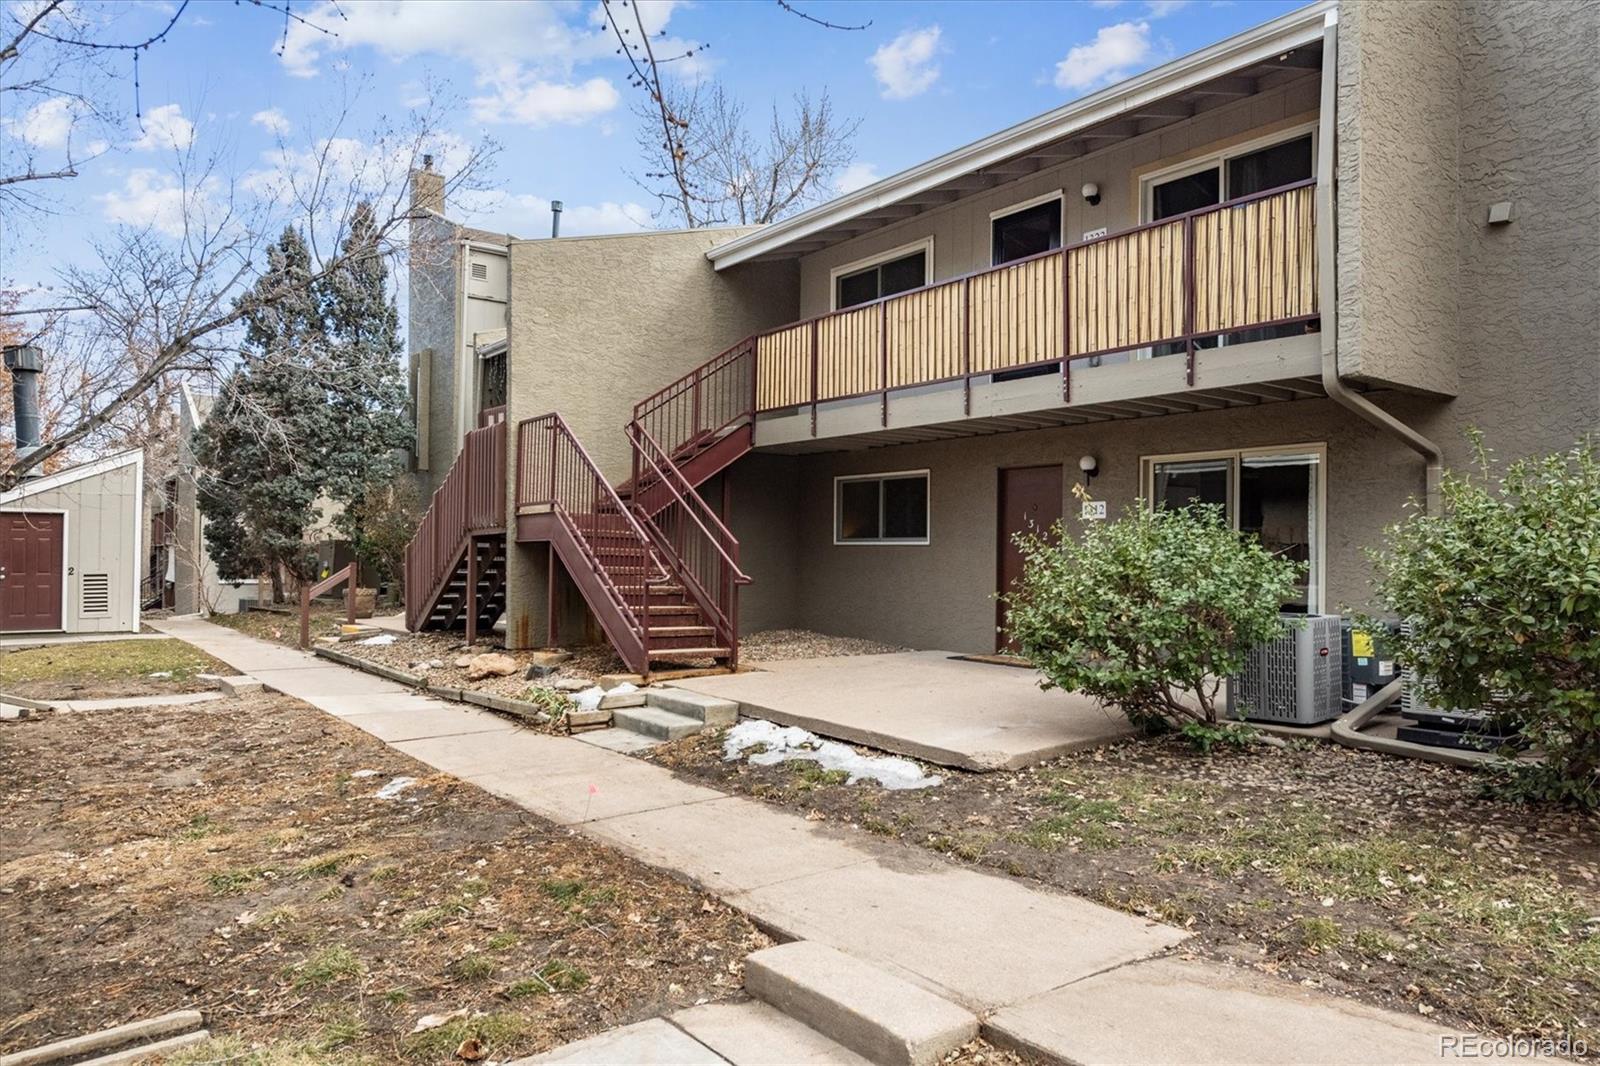 5300 e cherry creek south drive, denver sold home. Closed on 2024-03-26 for $212,000.